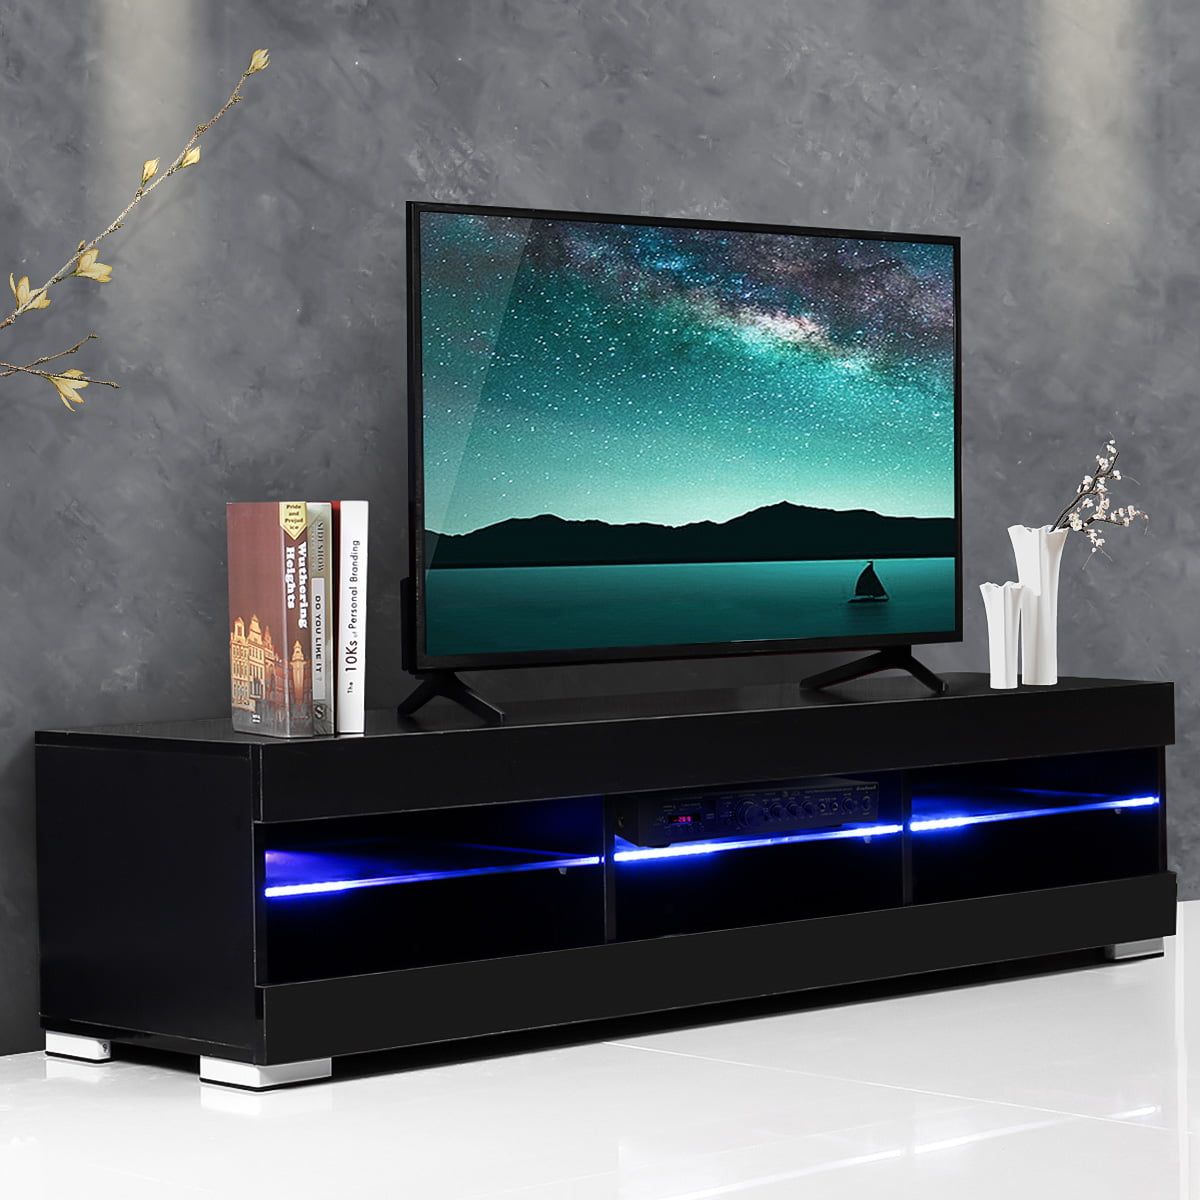 Modern Tv Furniture Cabinets 57'' Tv Stand Modern Decorative Cabinet Intended For Tv Stands With Lights (View 17 of 20)